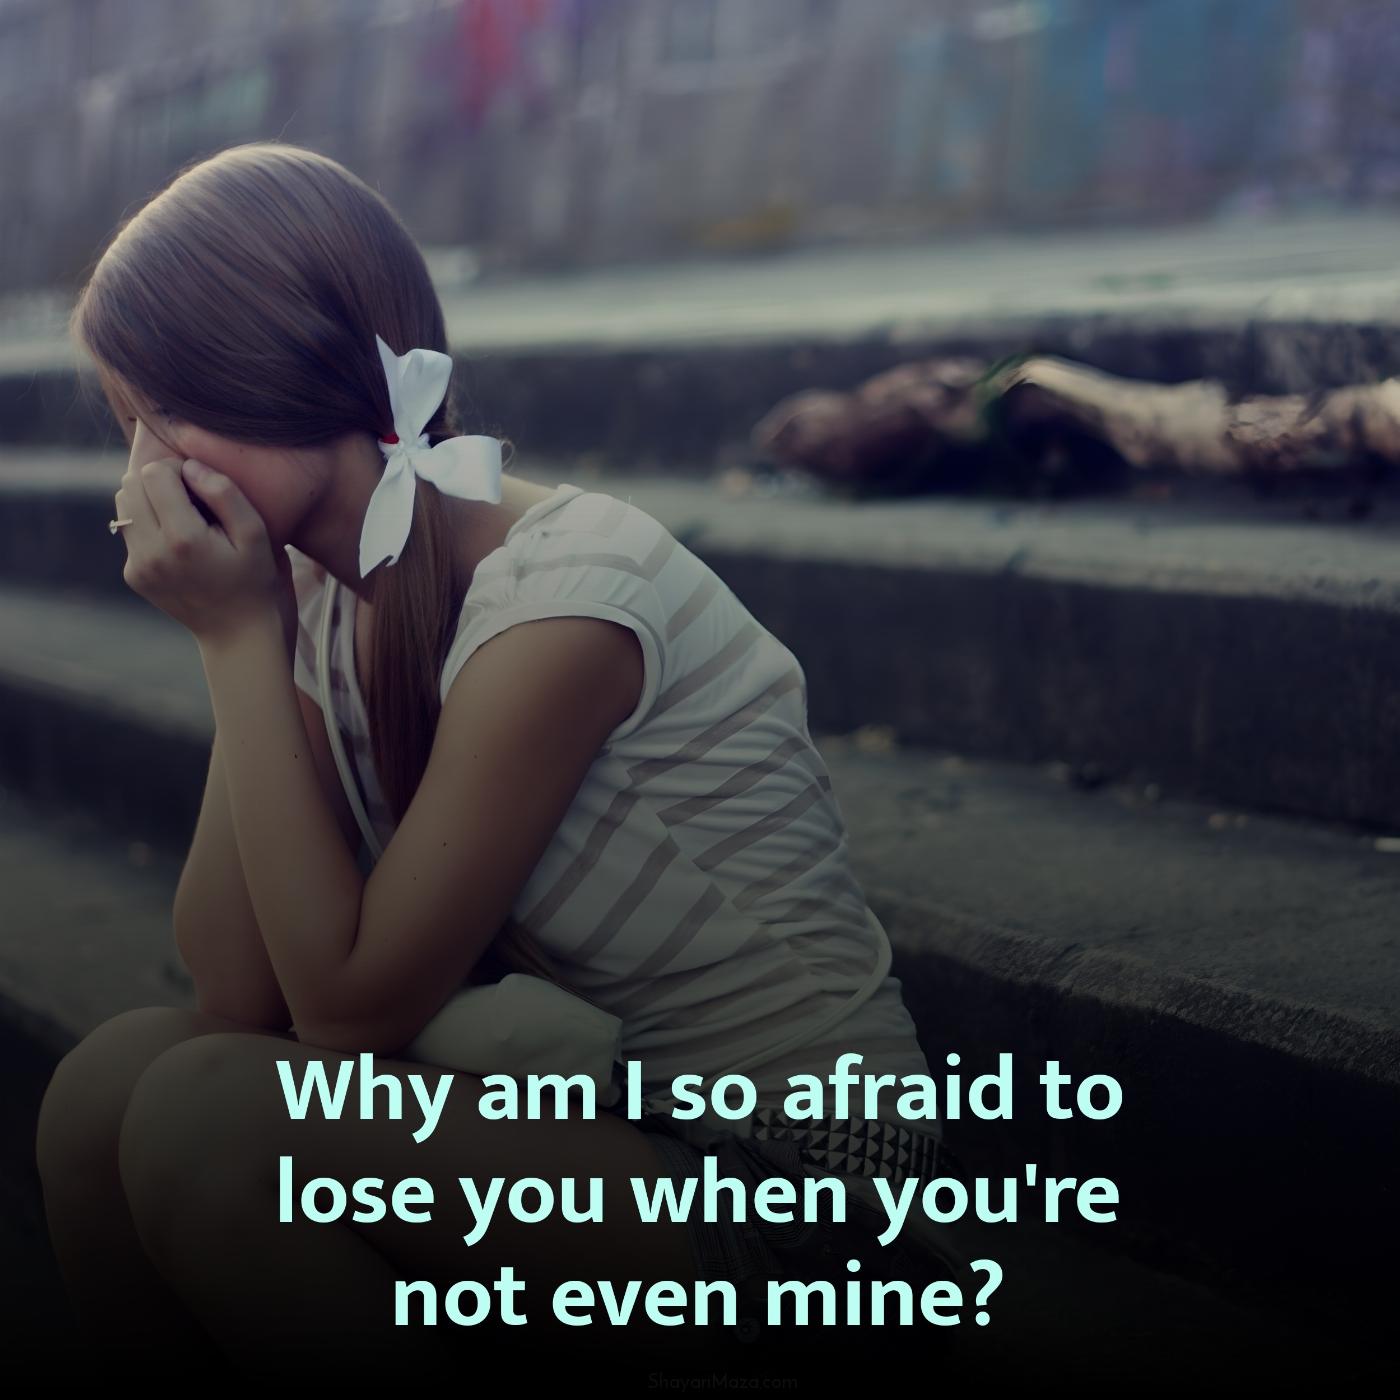 Why am I so afraid to lose you when you're not even mine?